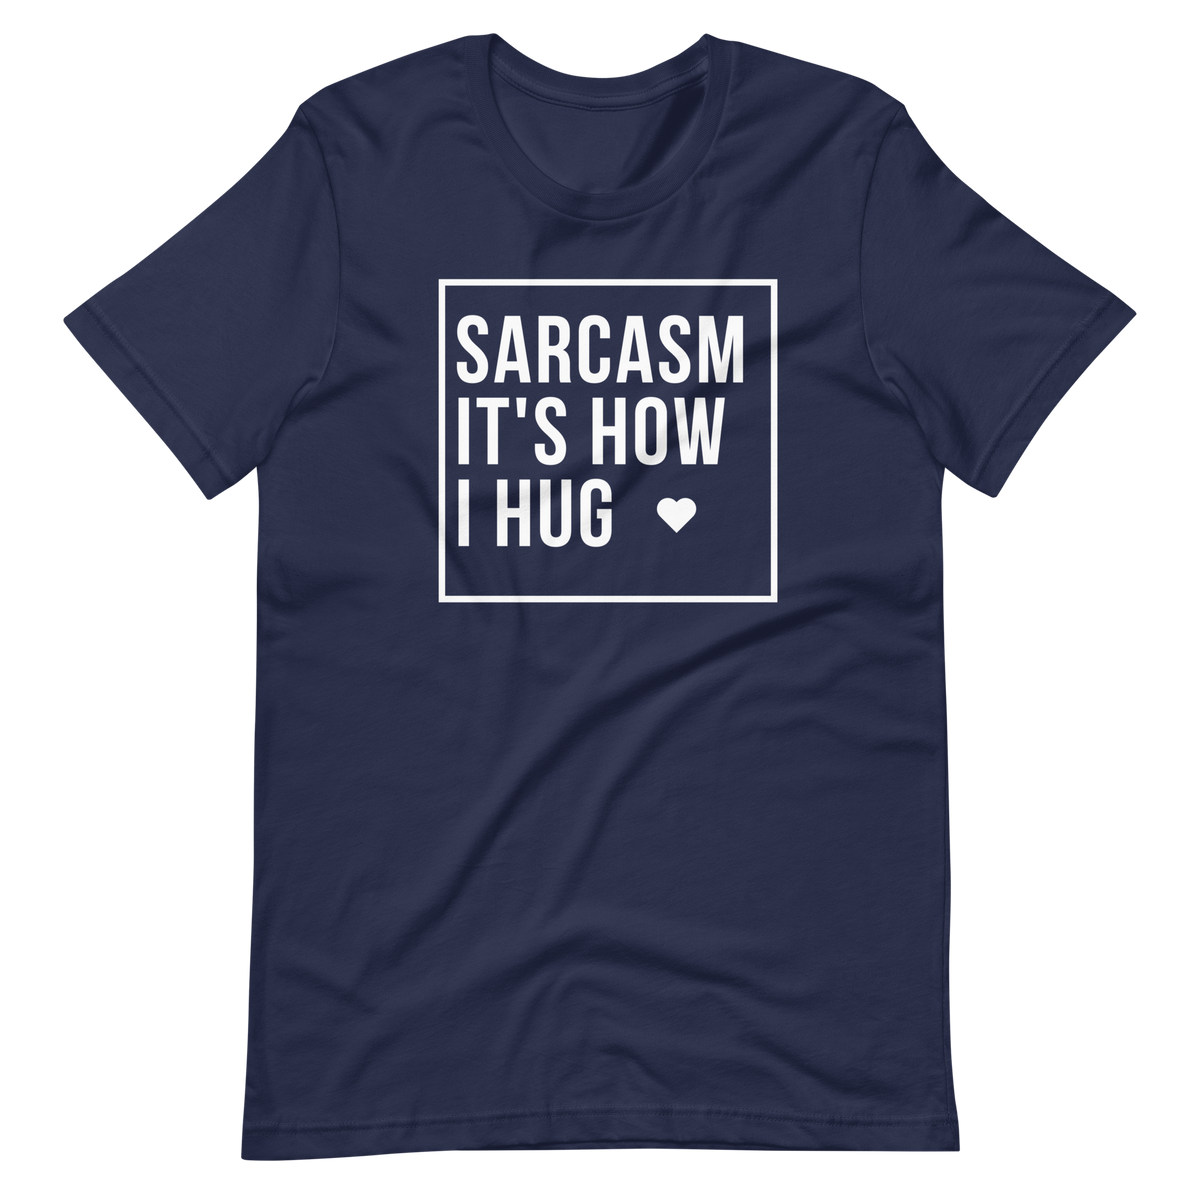 Sarcasm It's How I Hug T-Shirt, Sarcasm Is How I Hug Shirt, Womens Sarcastic TShirt, Sarcastic Slogan T Shirt, Funny Shirt, Gift for her